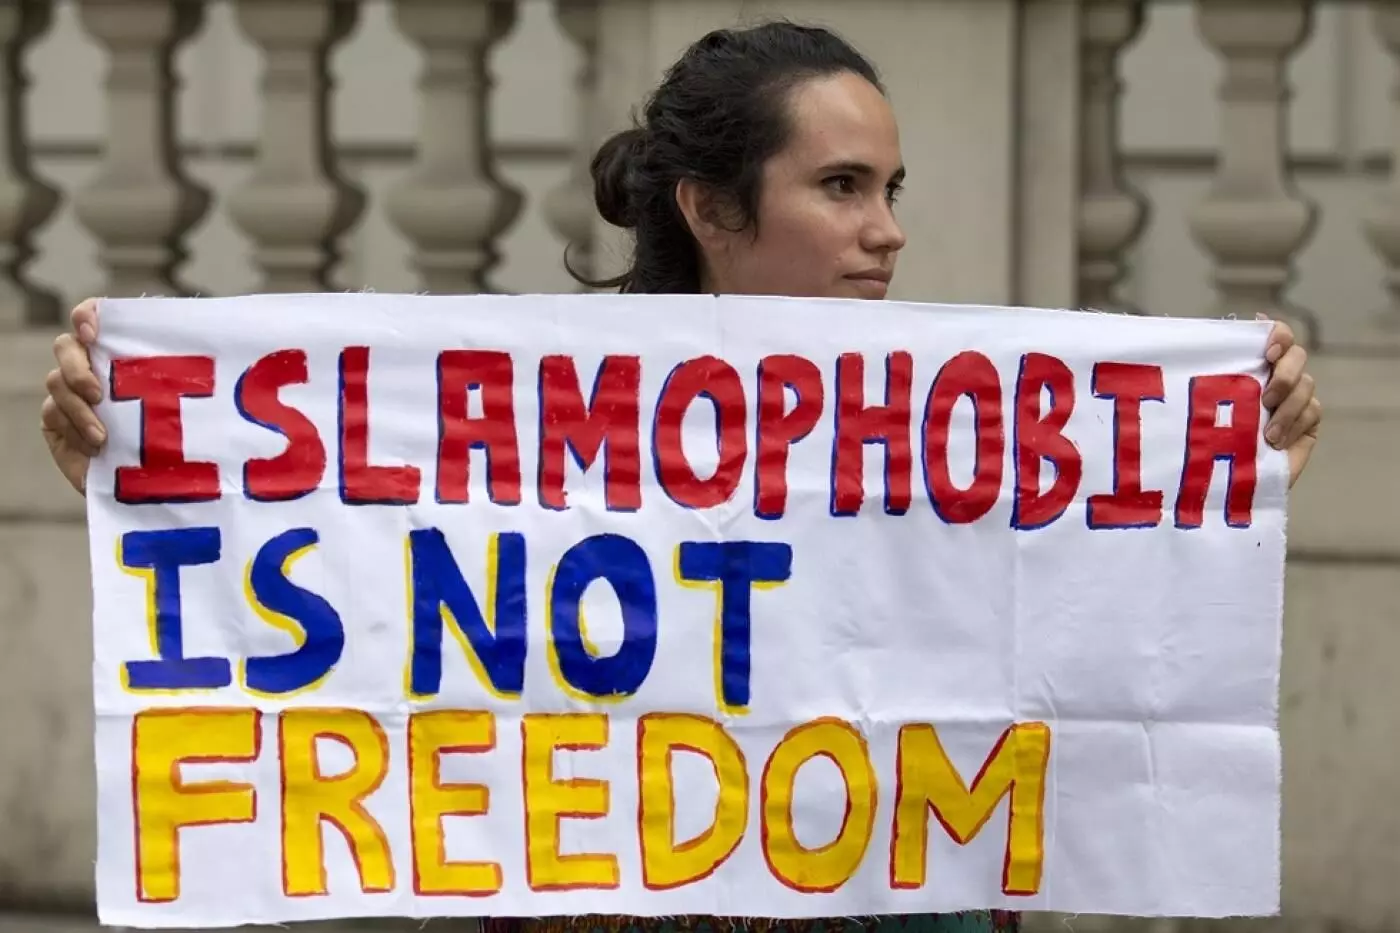 Frances free speech protection to cover up Islamophobia